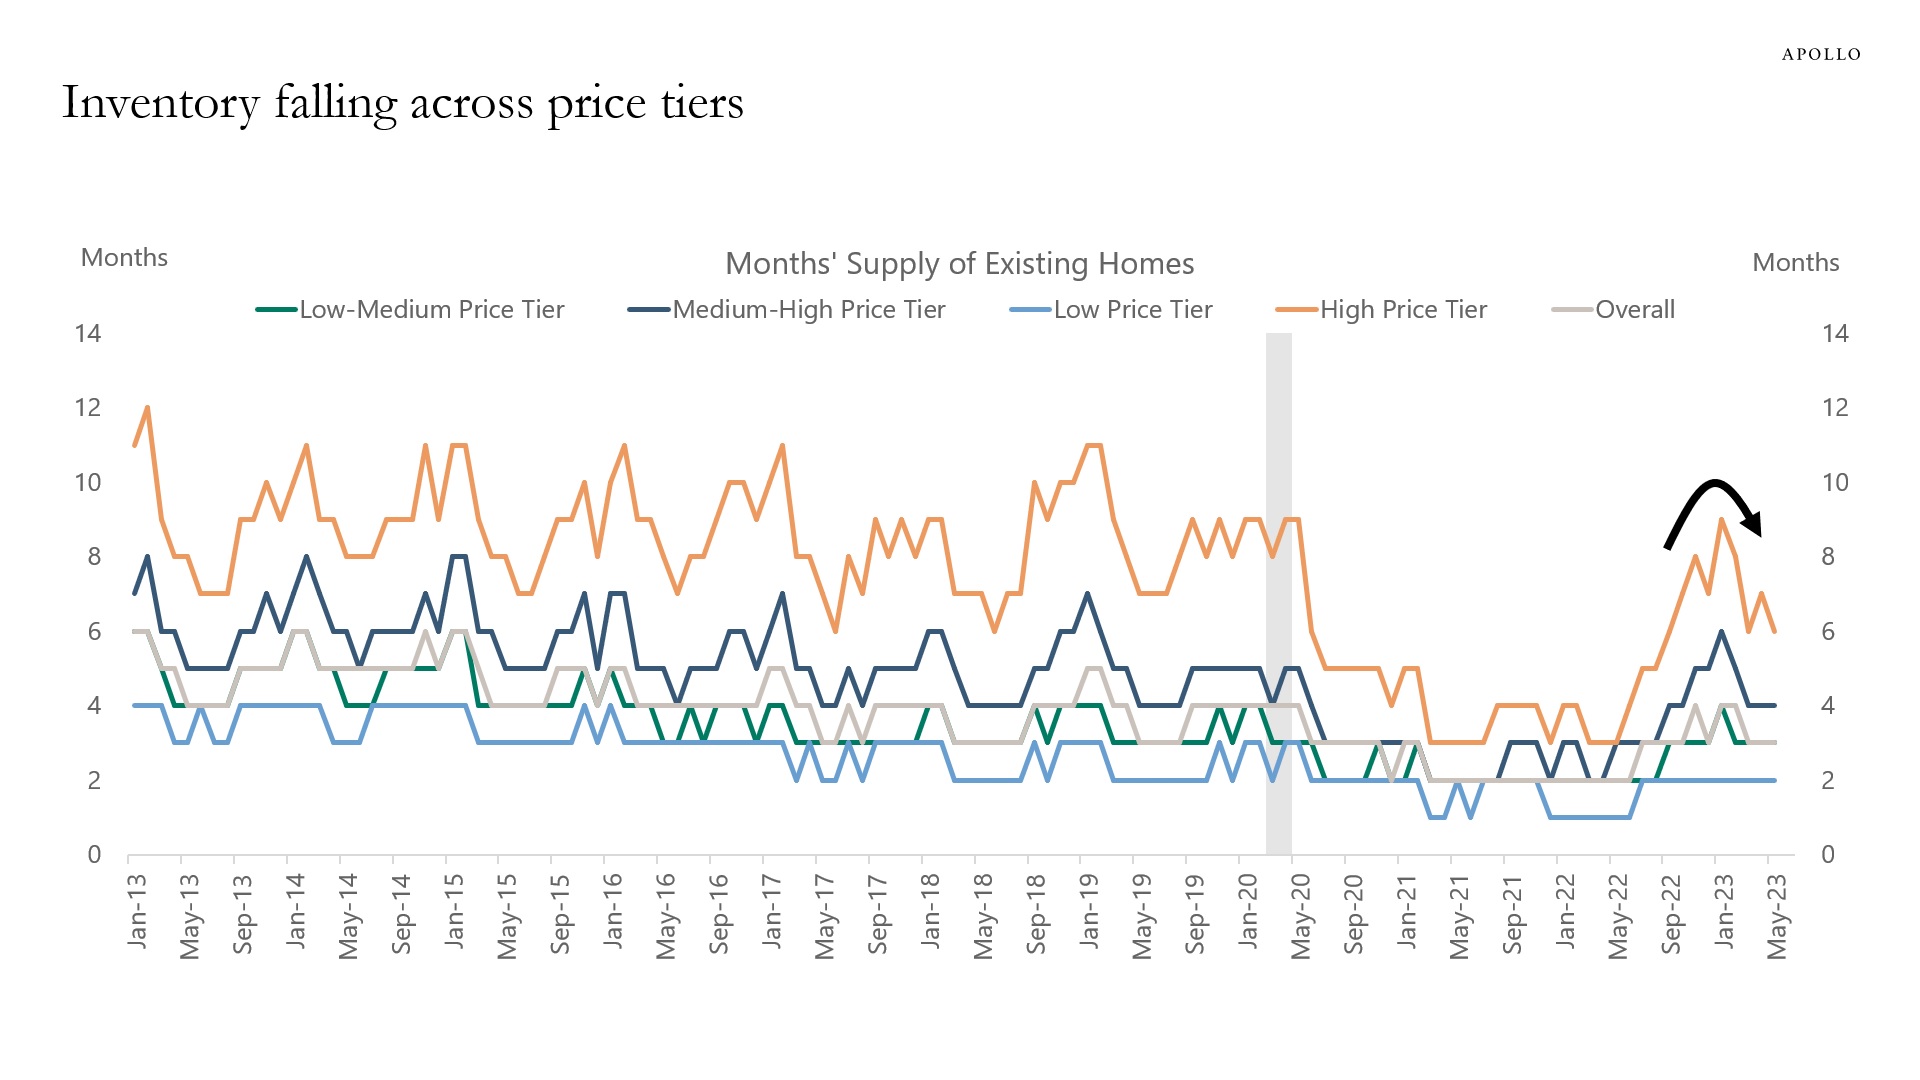 Housing inventories are falling across all price levels.